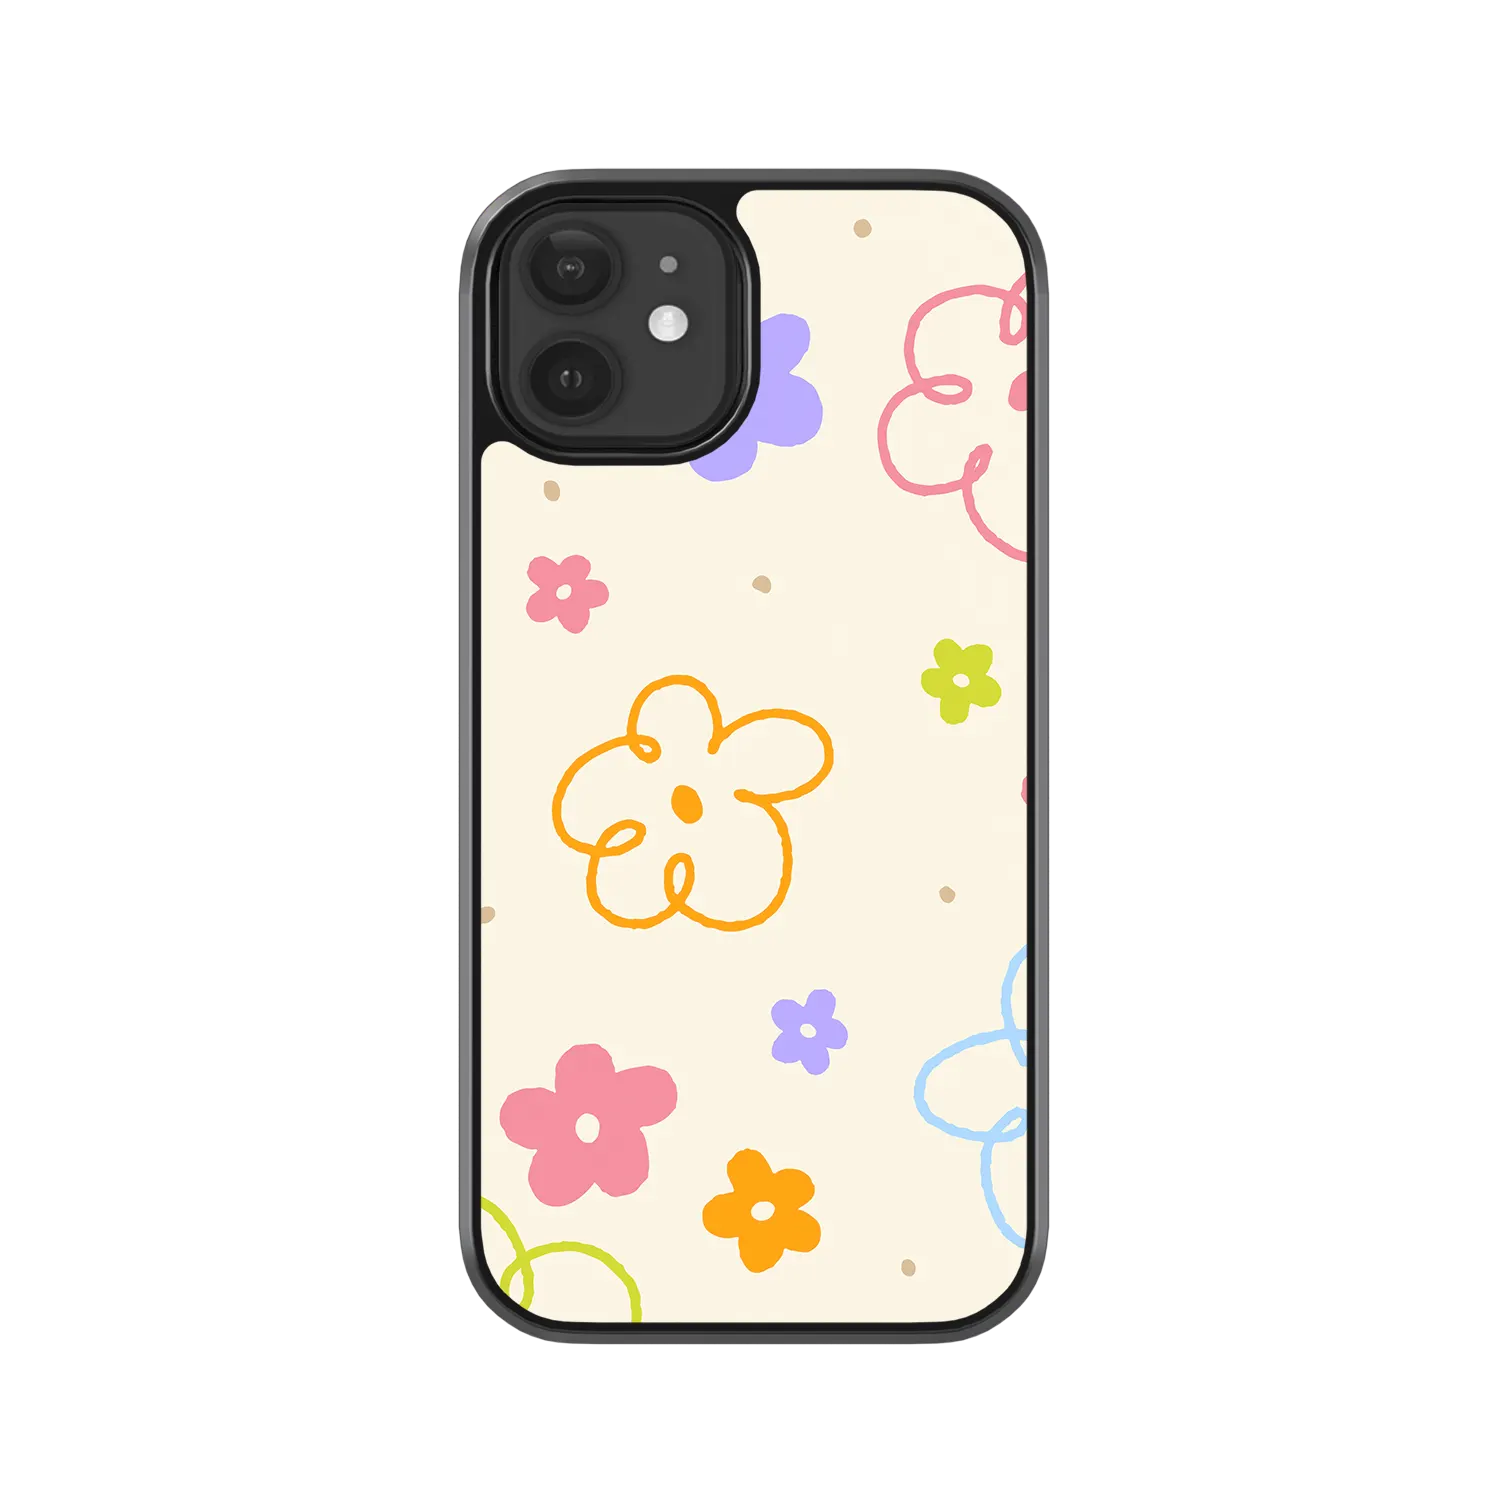 Youth Vibe ipHONE 11 Case